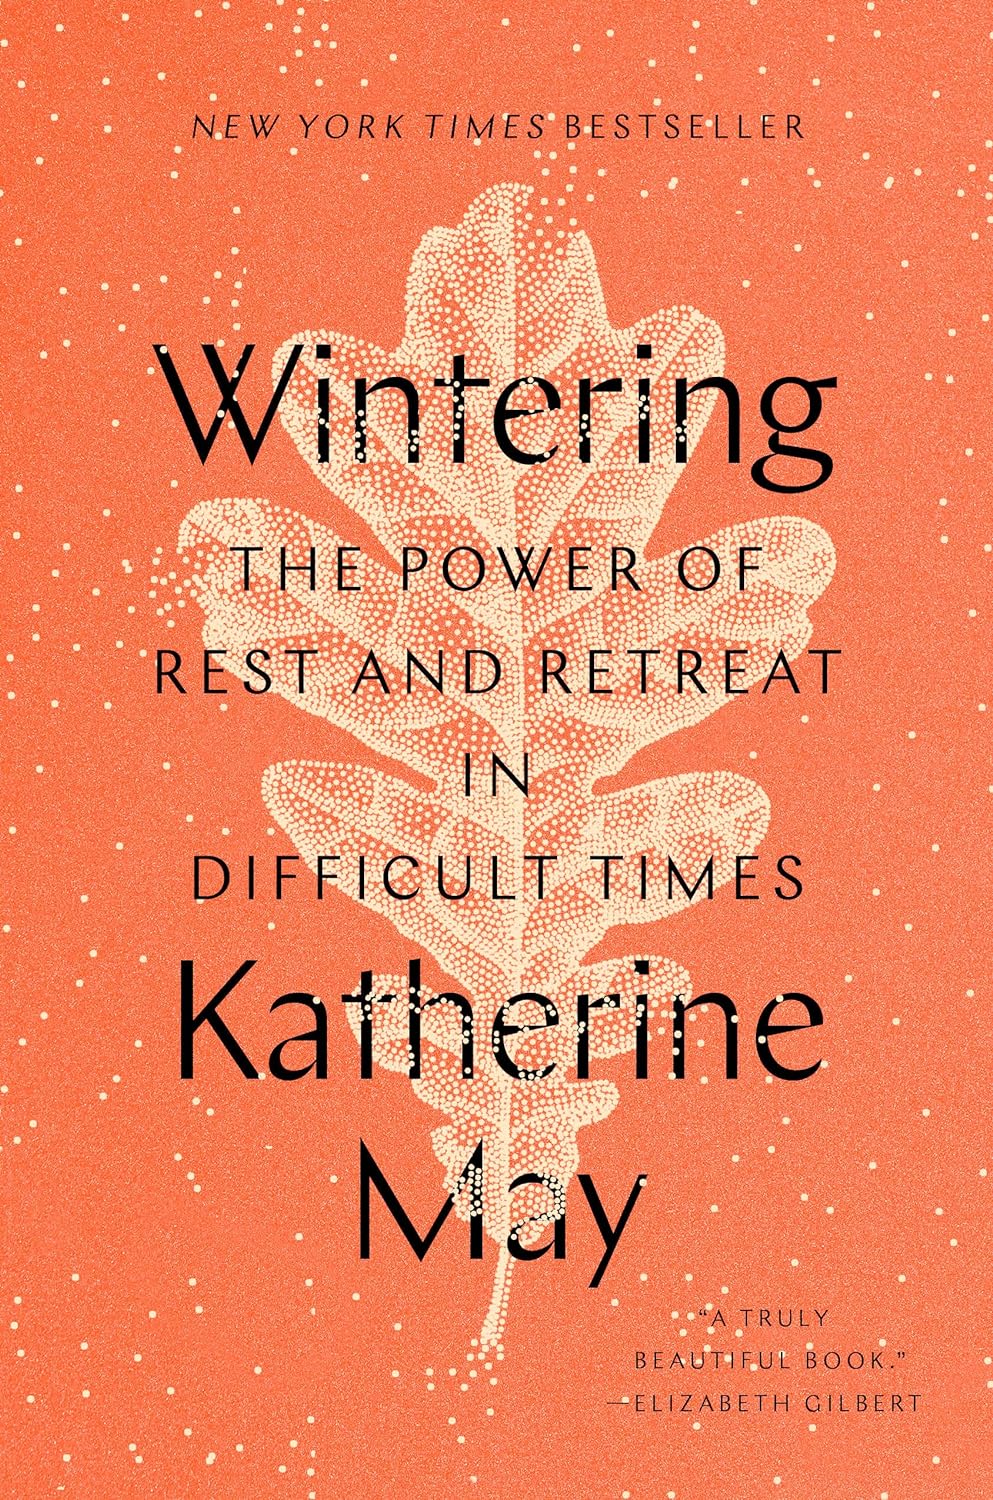 Wintering: The Power of Rest and Retreat in Difficult Times - by Katherine May (Hardcover)